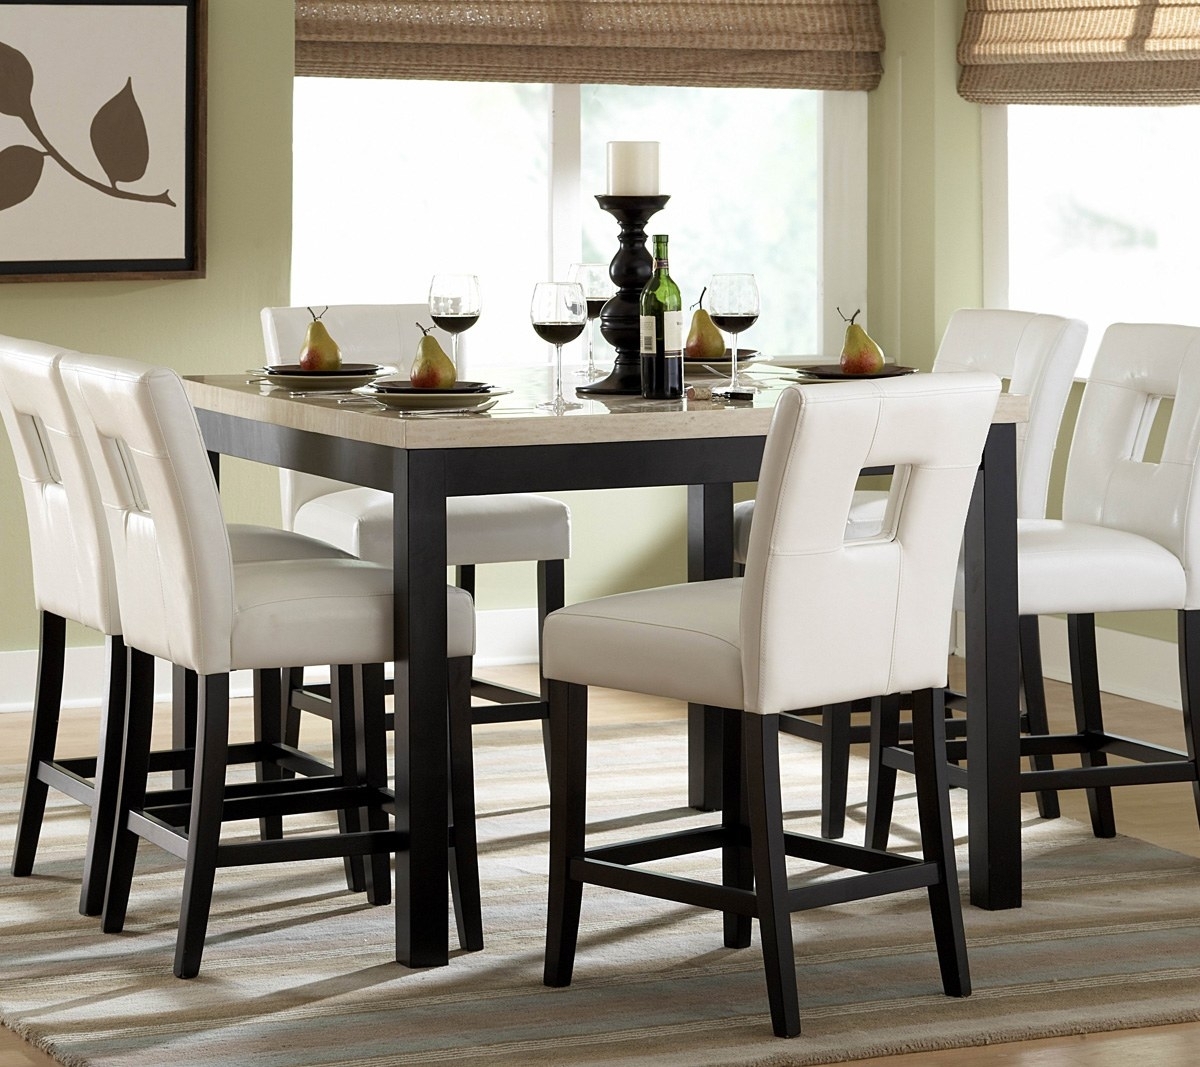 Used 7 Piece Dining Room Sets For Sale